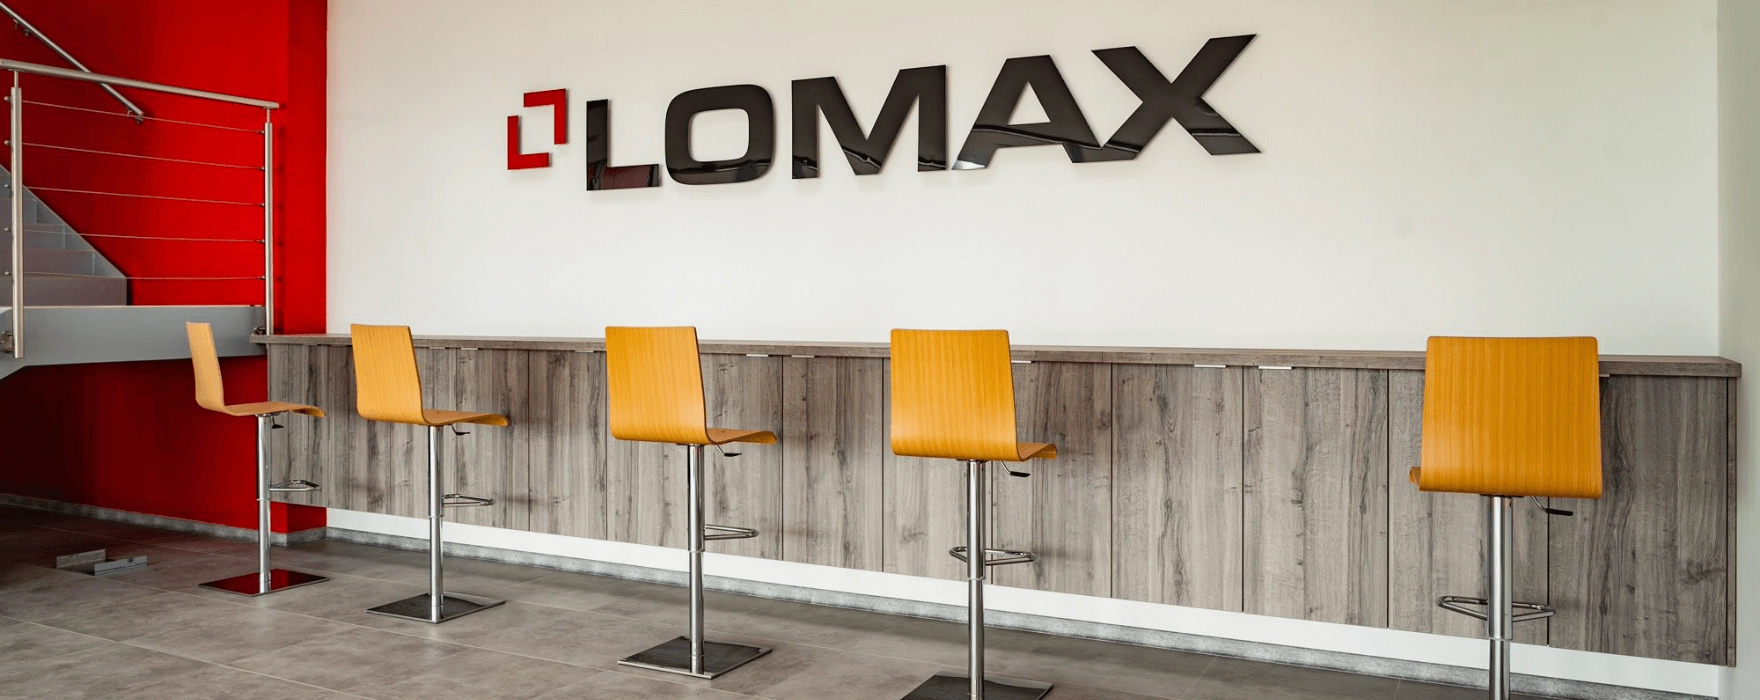 For LOMAX partners